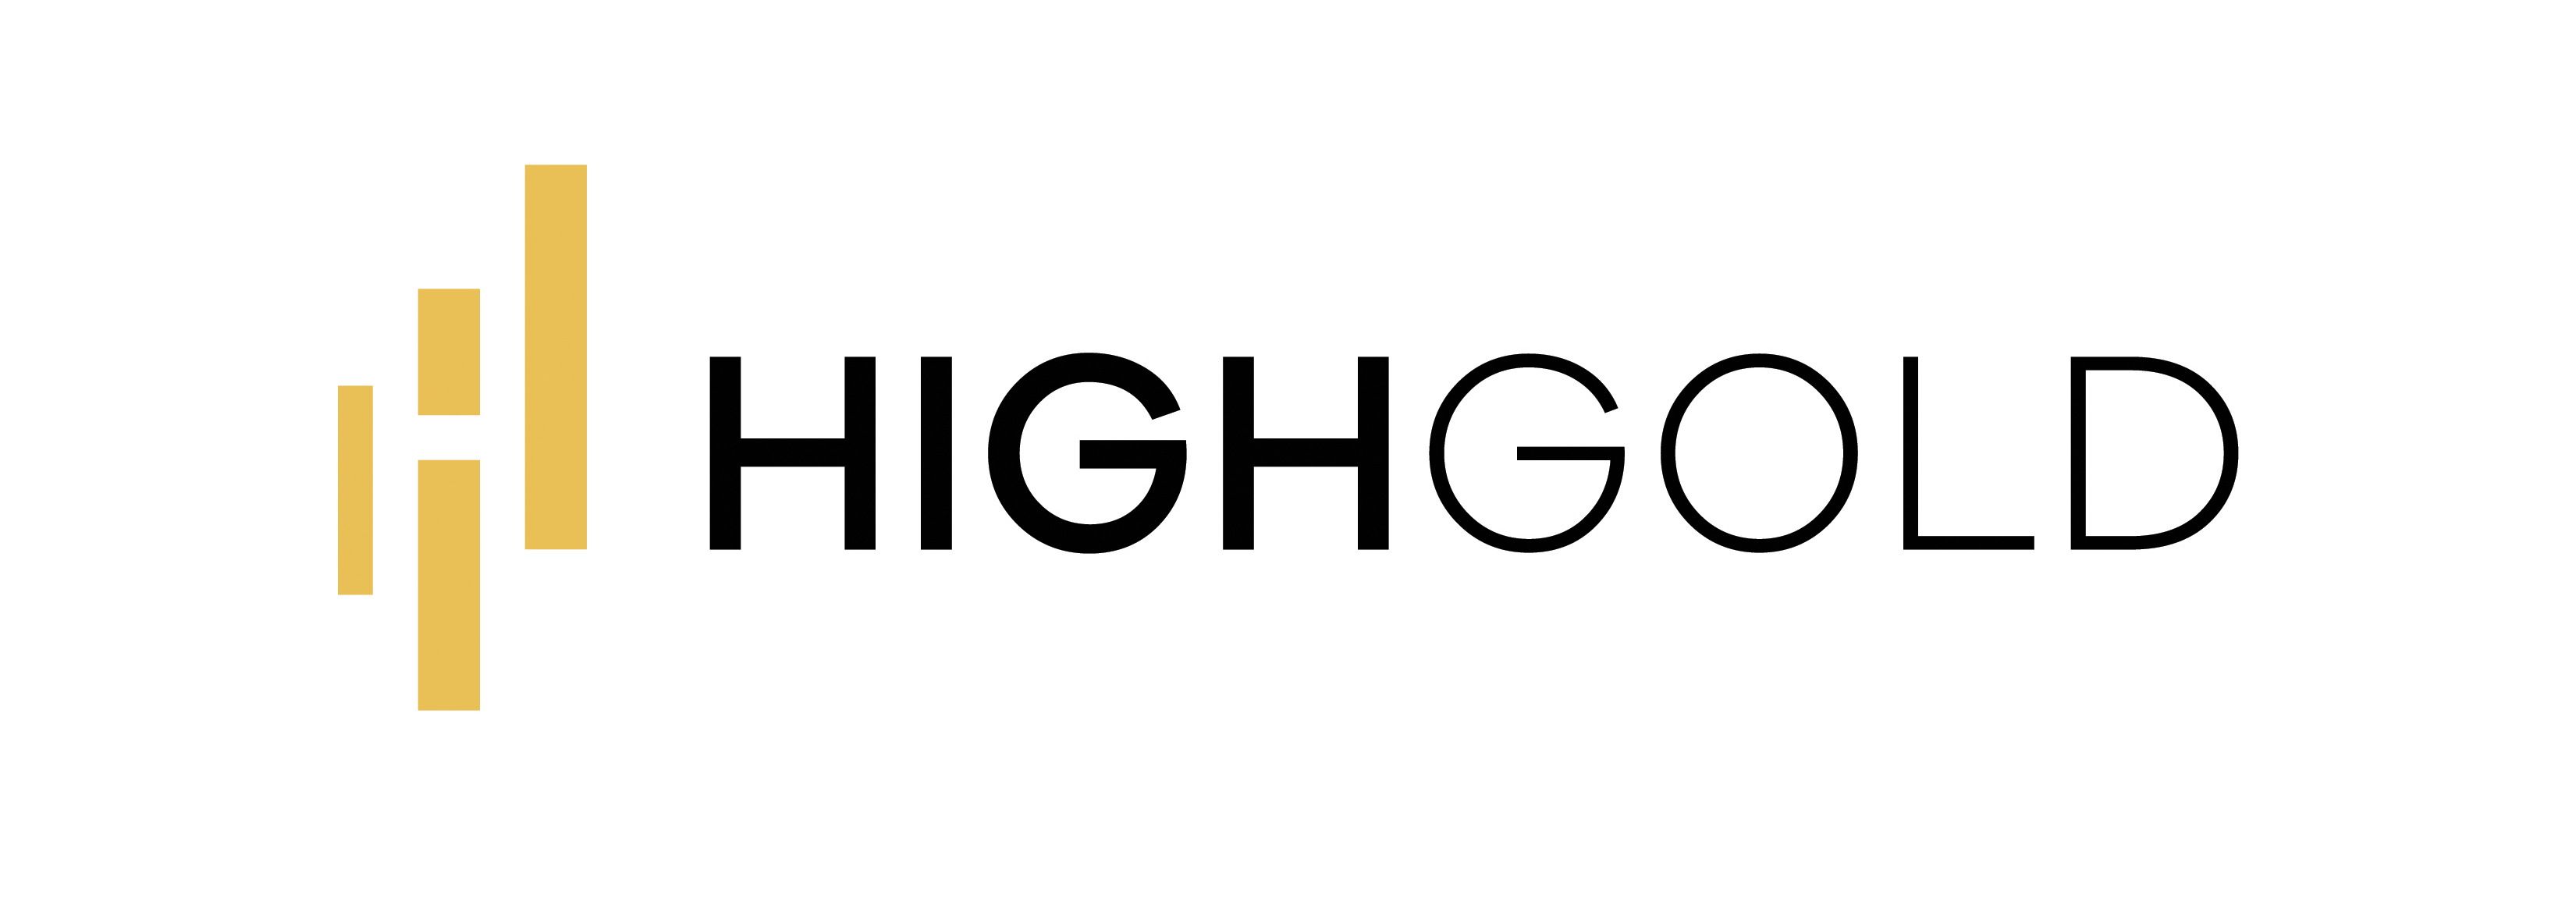 Highgold Mining Intersects Jt Deposit Mineralization In 180 Meter Step Out Increasing Strike Length By 50 To 500 Meters And Expanding Plunge Length To 575 Meters Business Wire